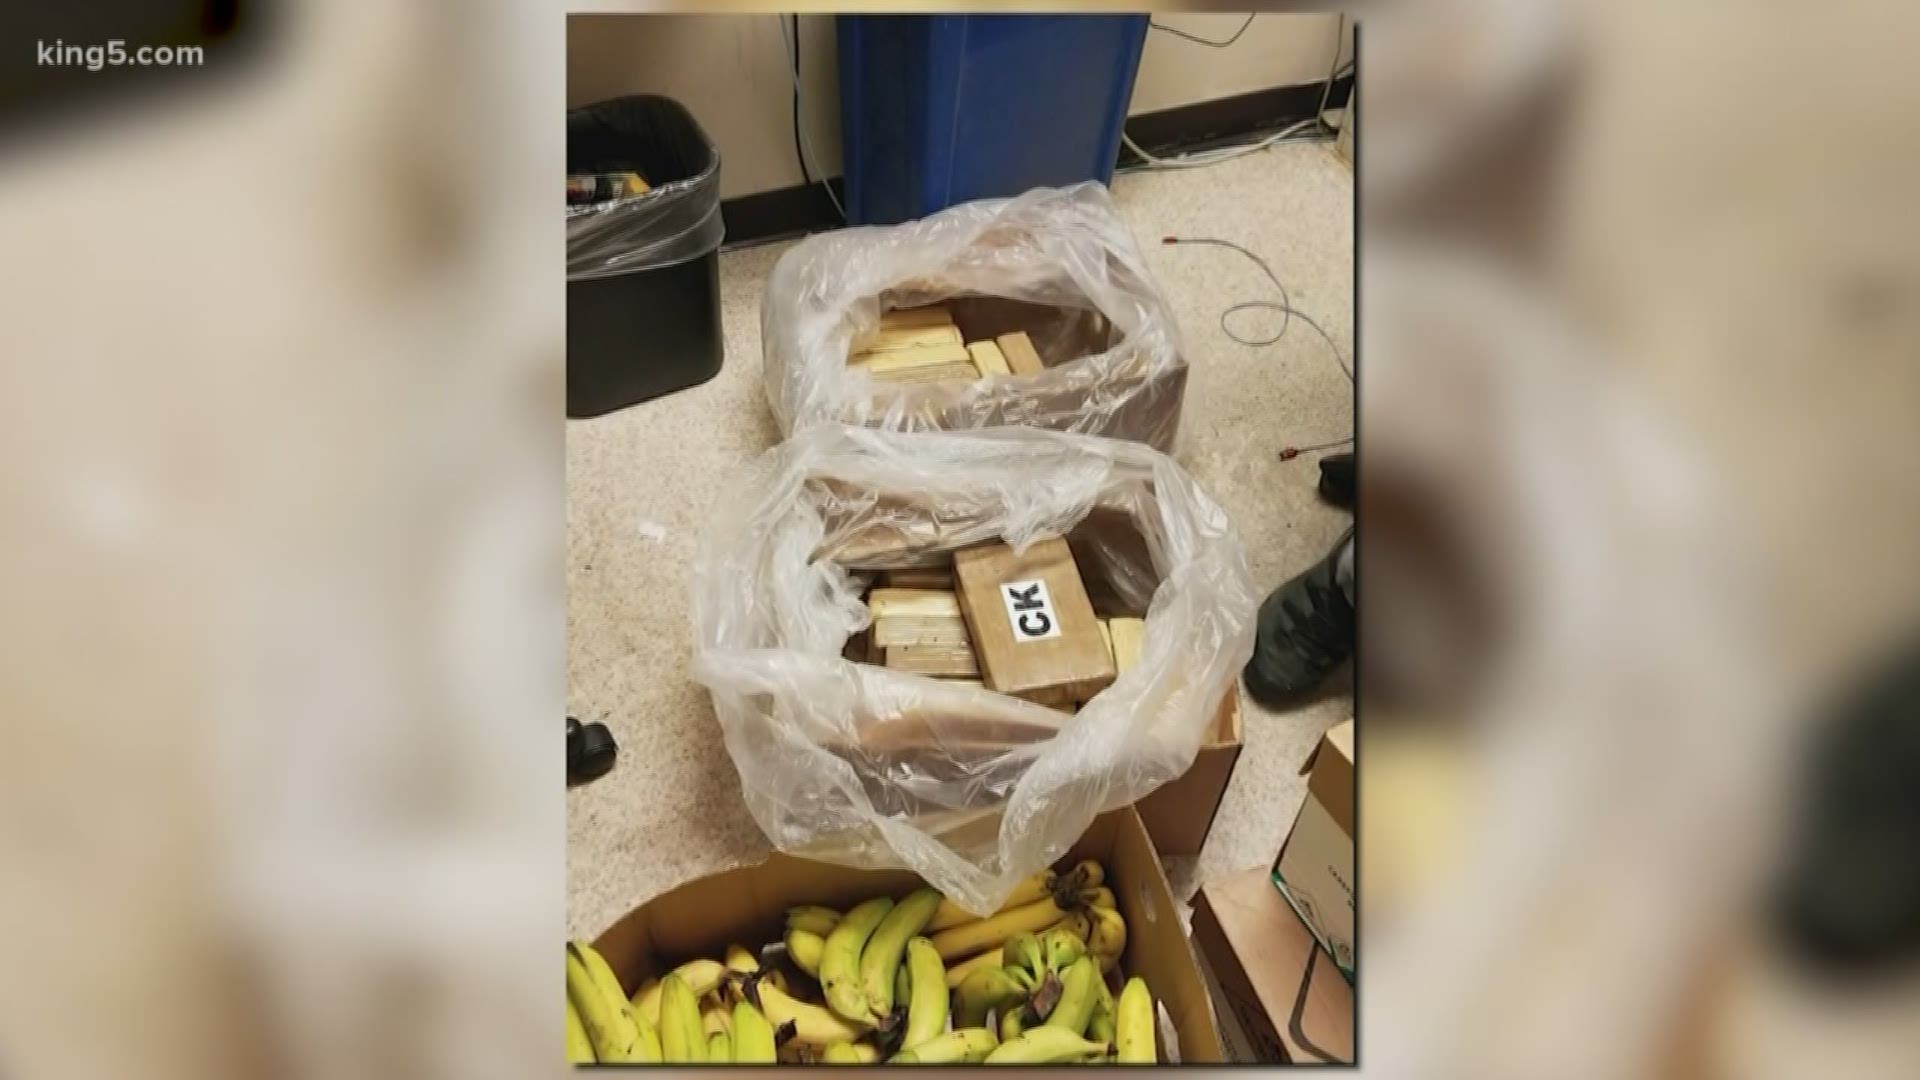 Cocaine valued at more than $1 million was found inside shipments of bananas at three Safeway stores in Western Washington.